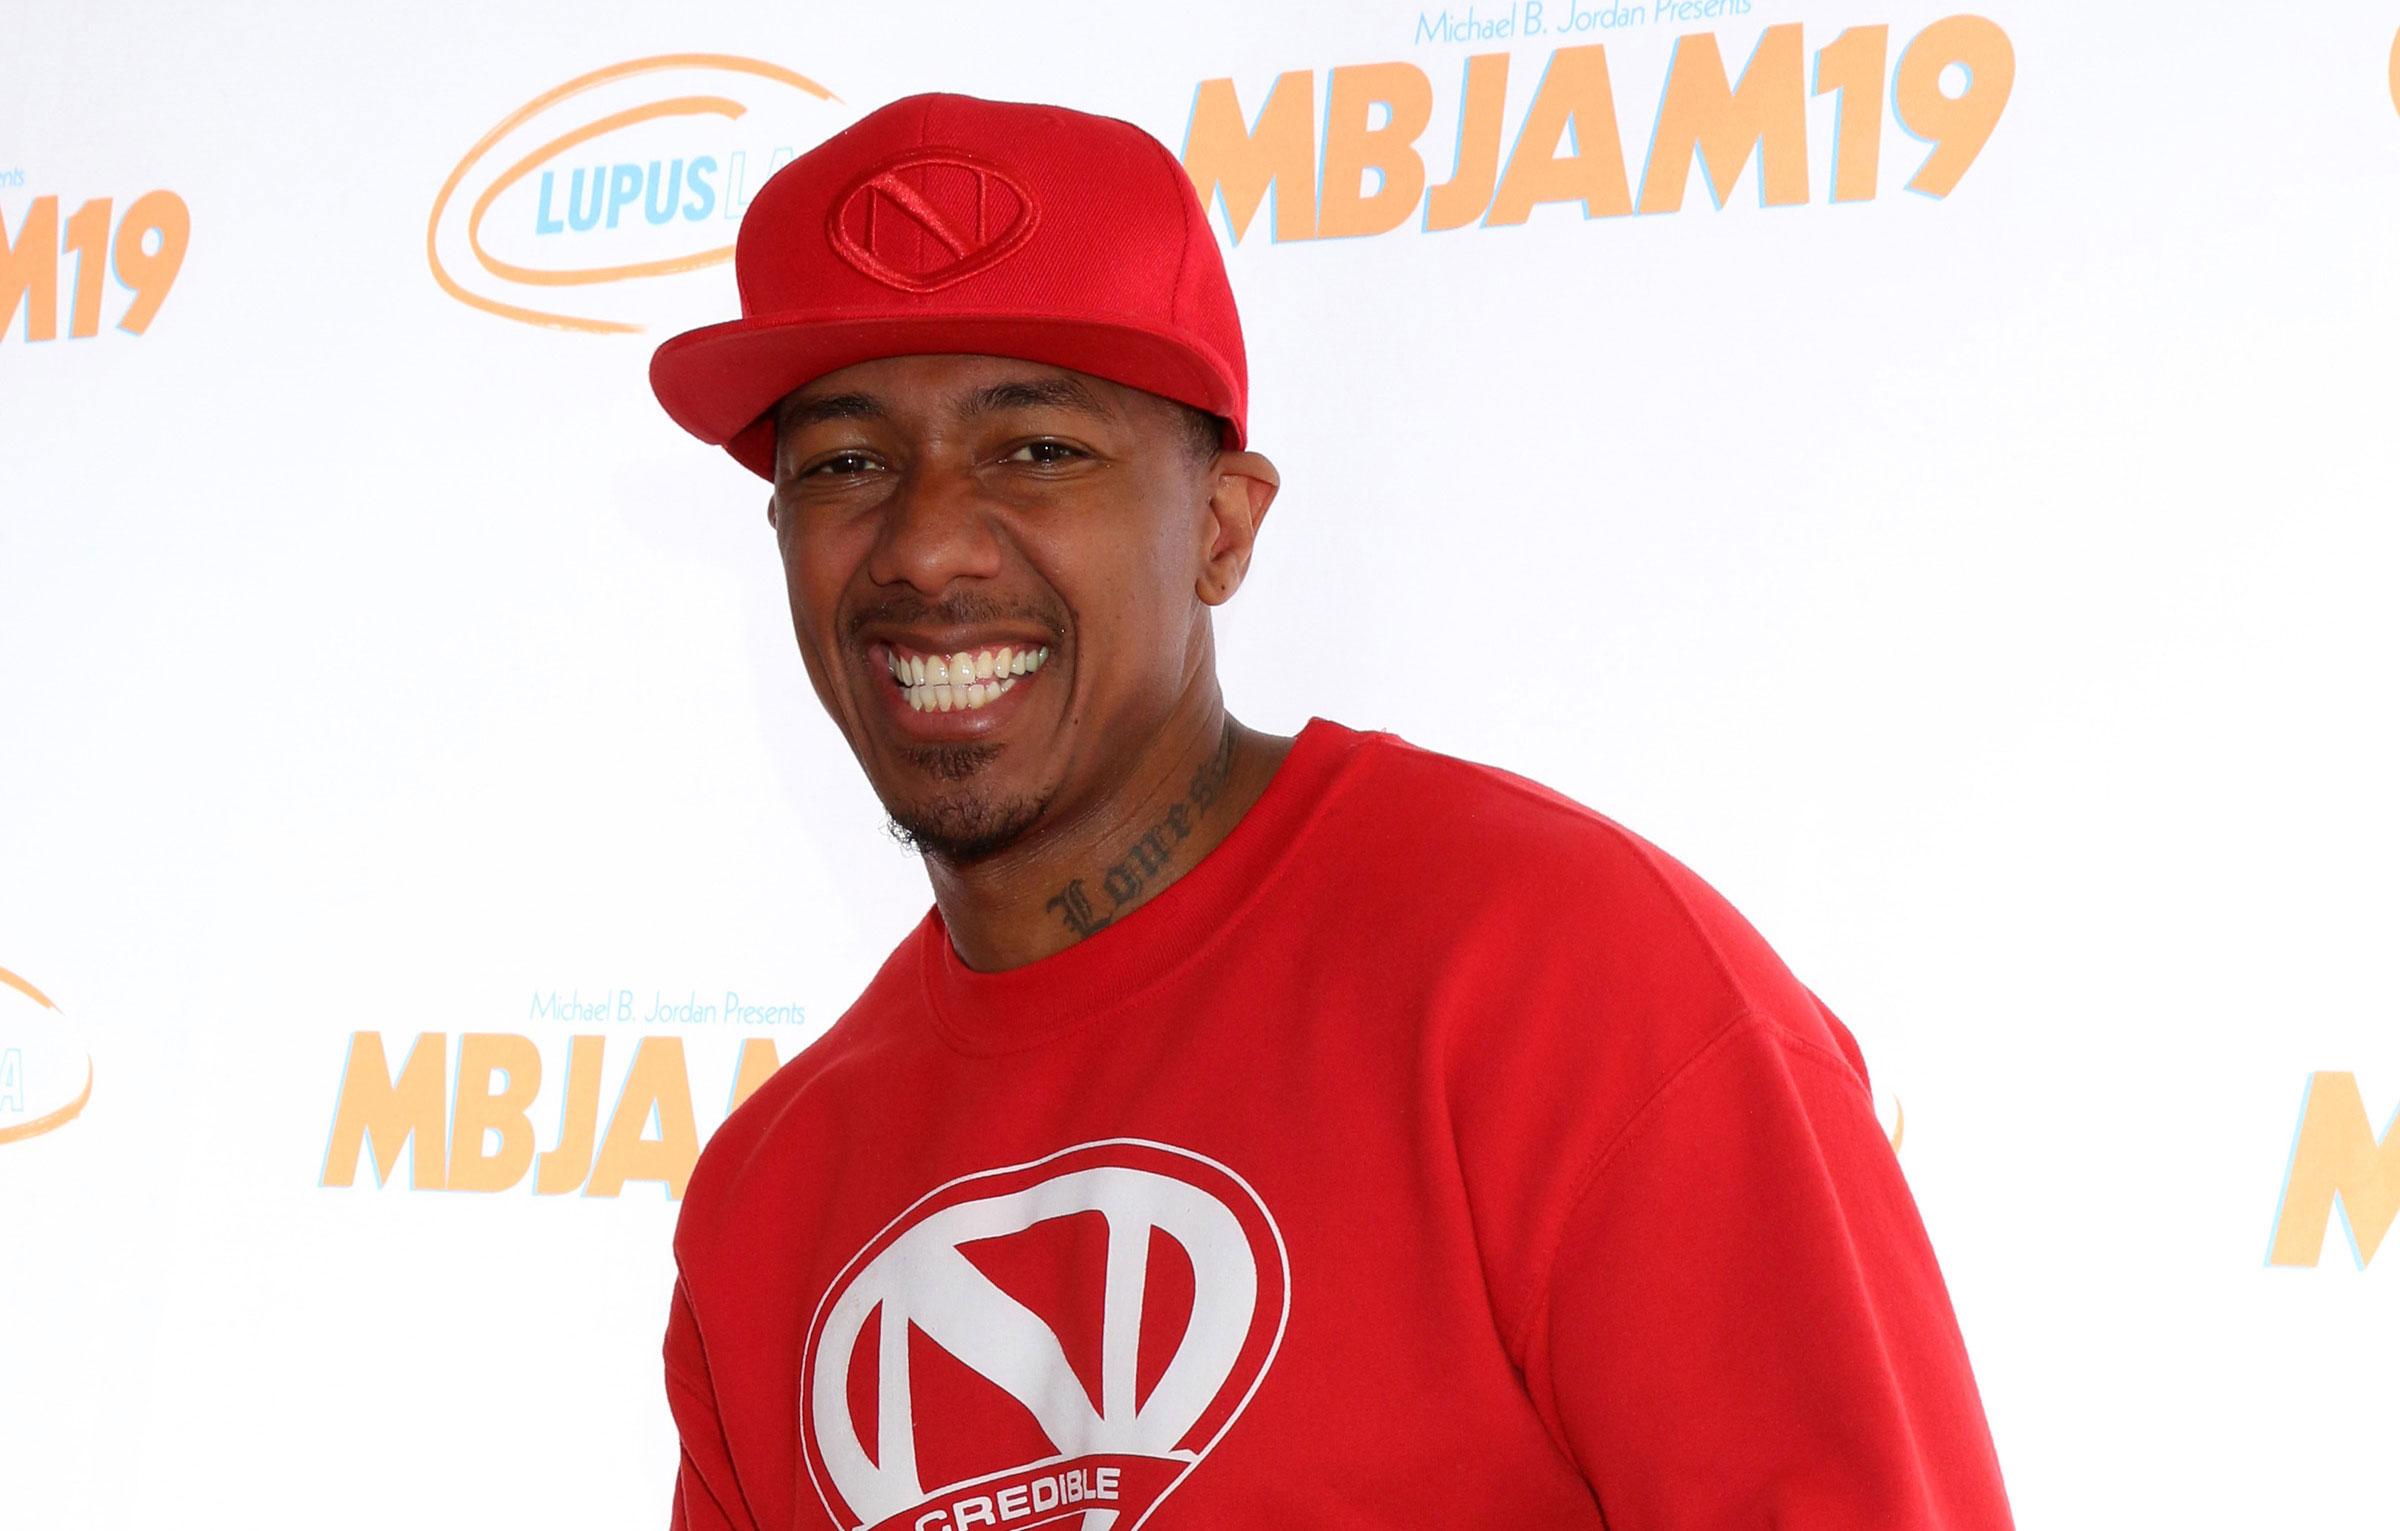 Nick Cannon Parties At Strip Club With Ex-Girlfriend Jessica White